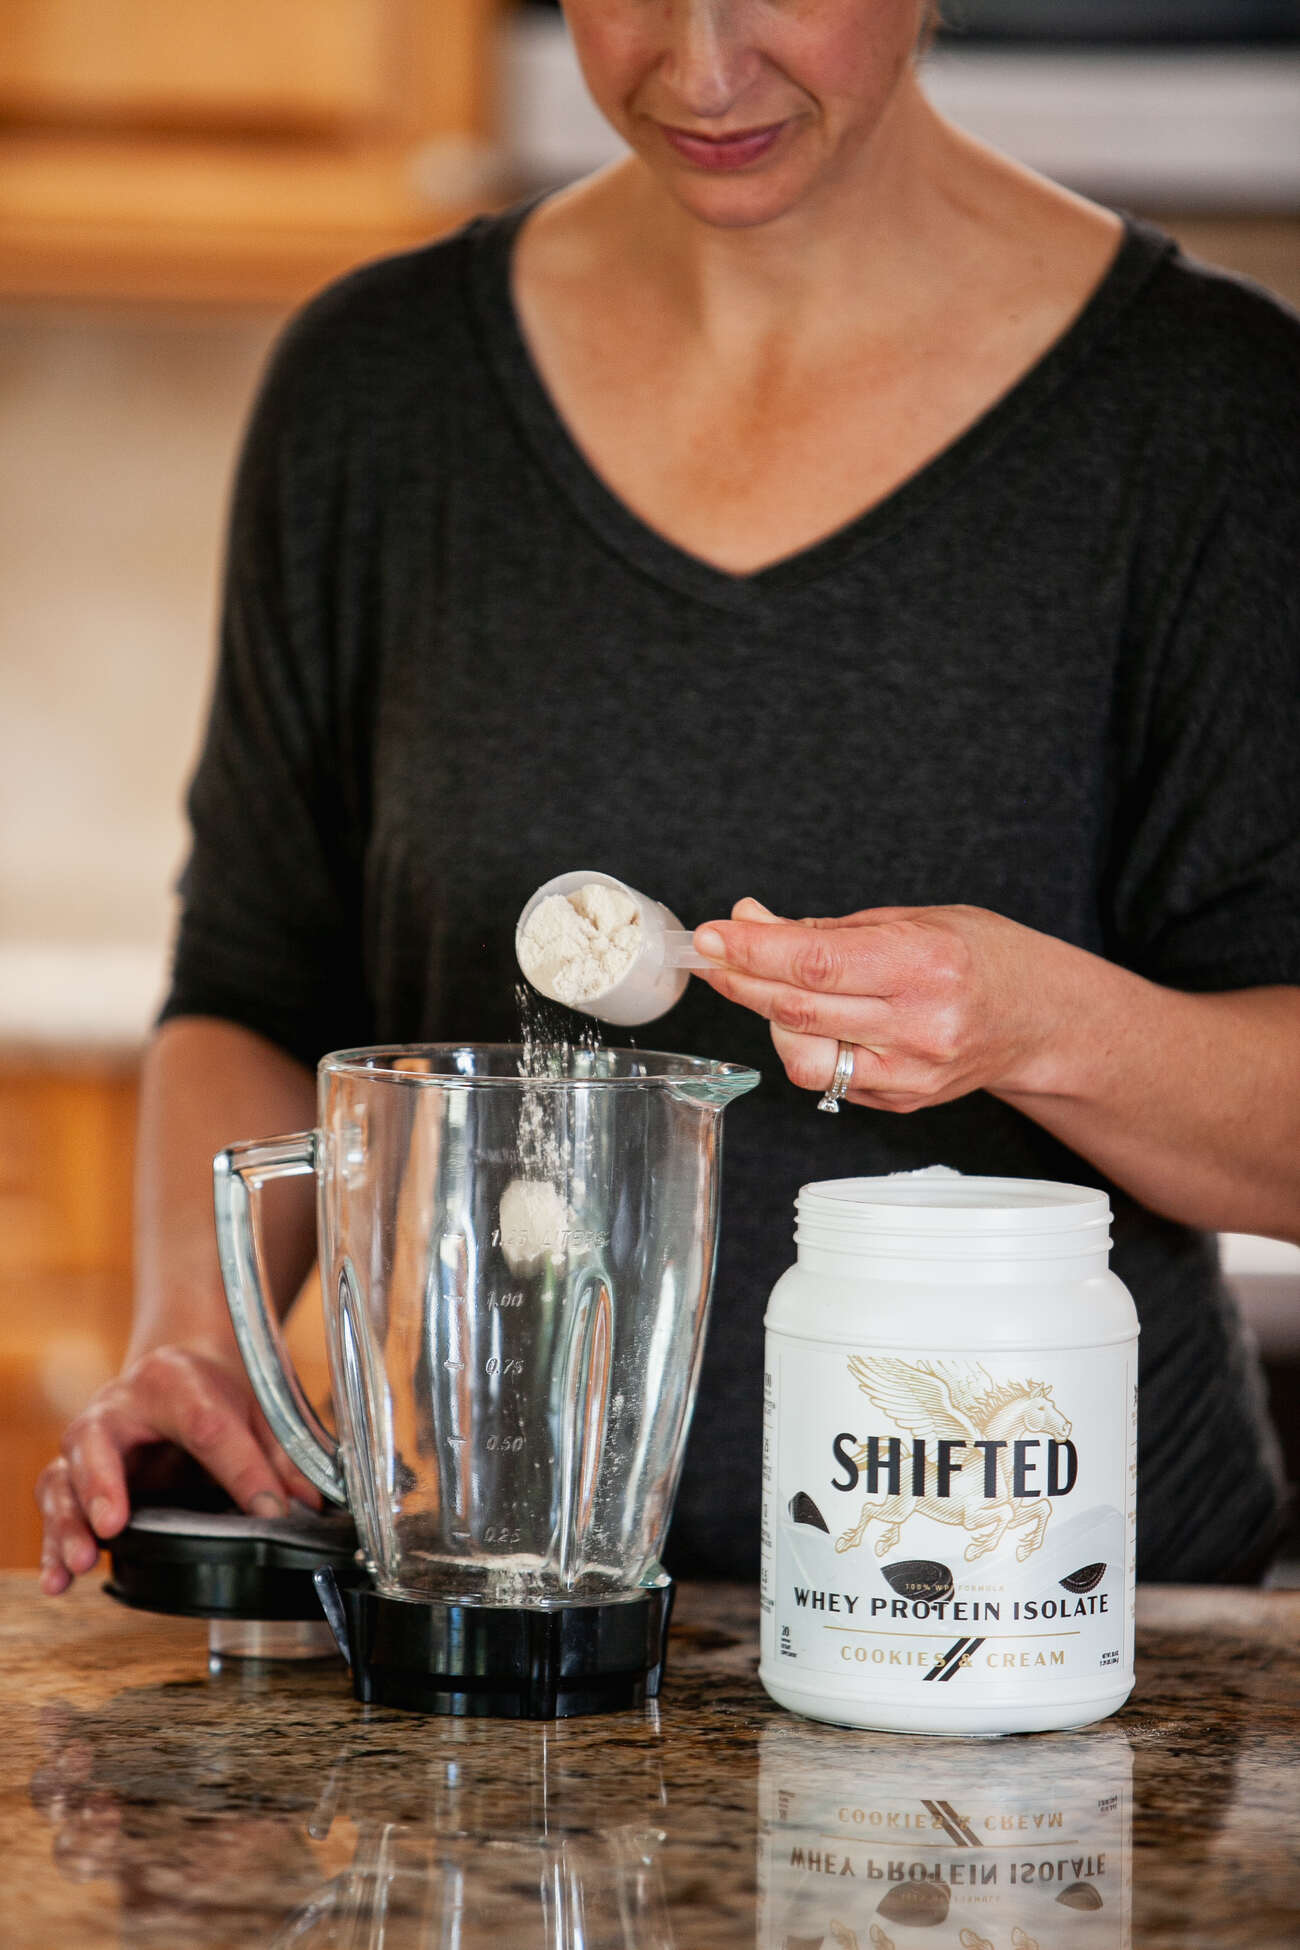 A woman scooping whey protein powder into a blender on a kitchen counter